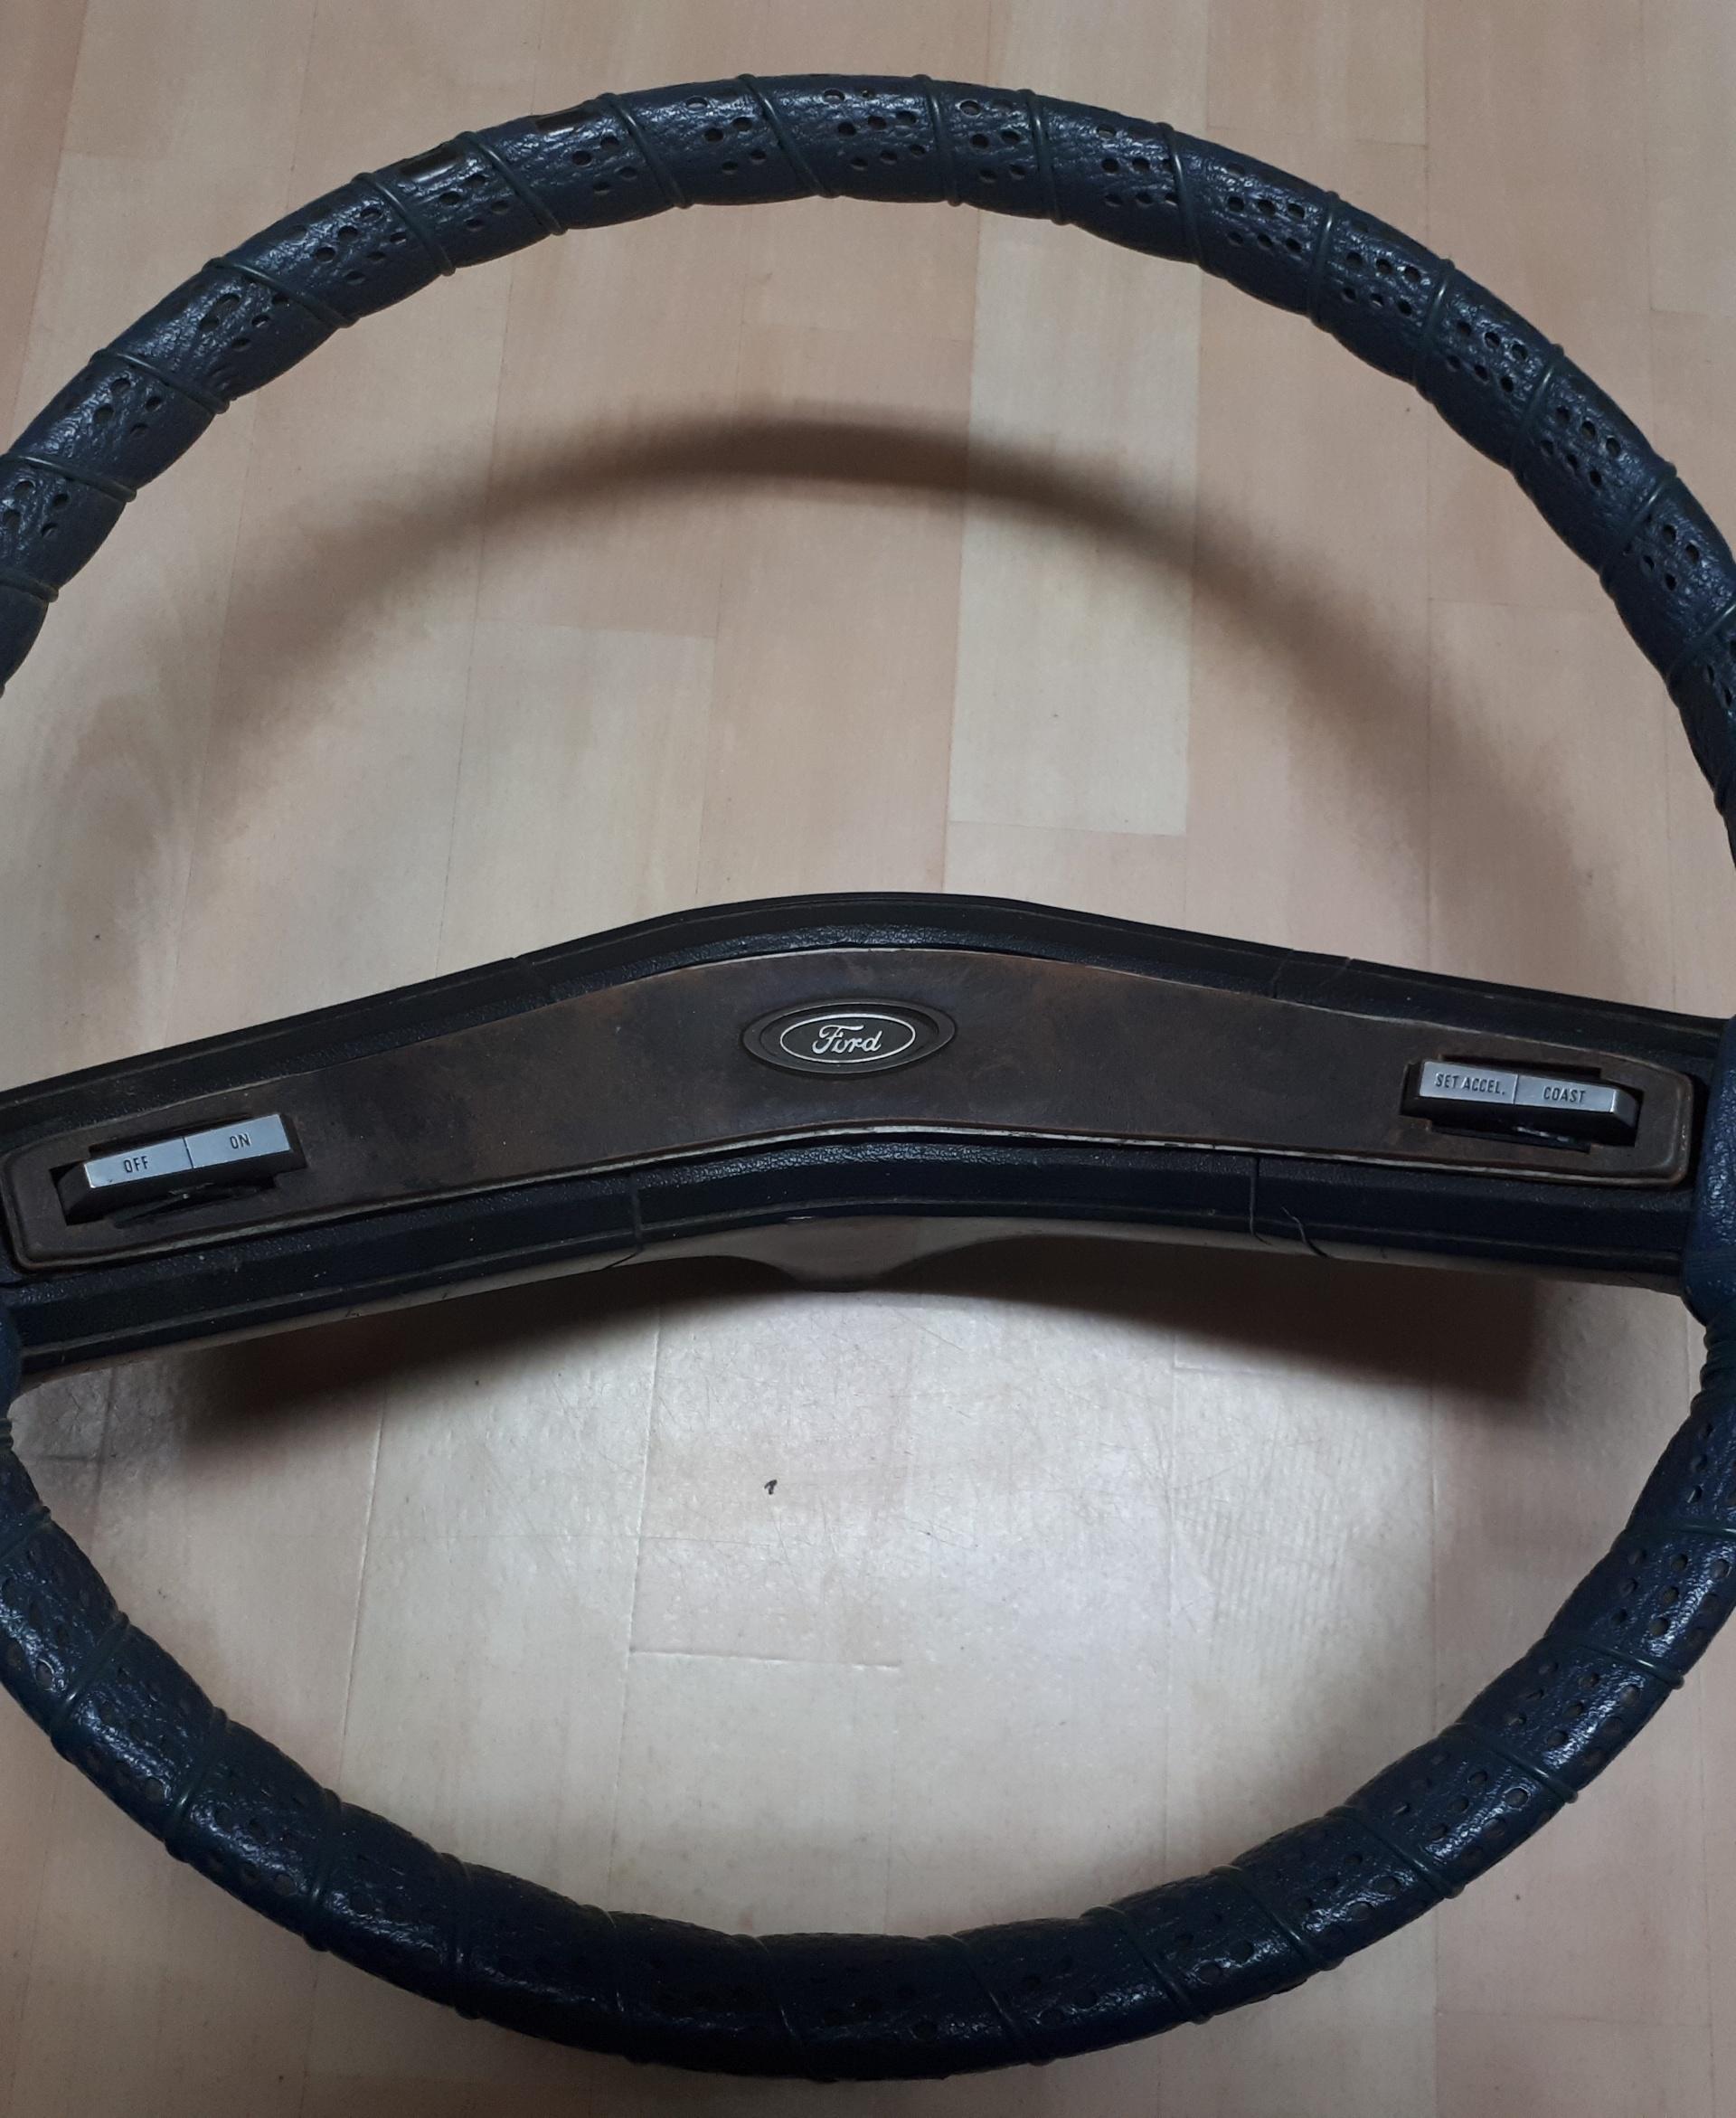 Ford Pickup 1973-1977 Steering Wheel Insert with Horn Bar and Cruise Control - The steering wheel with the insert and its cover installed - 3d model